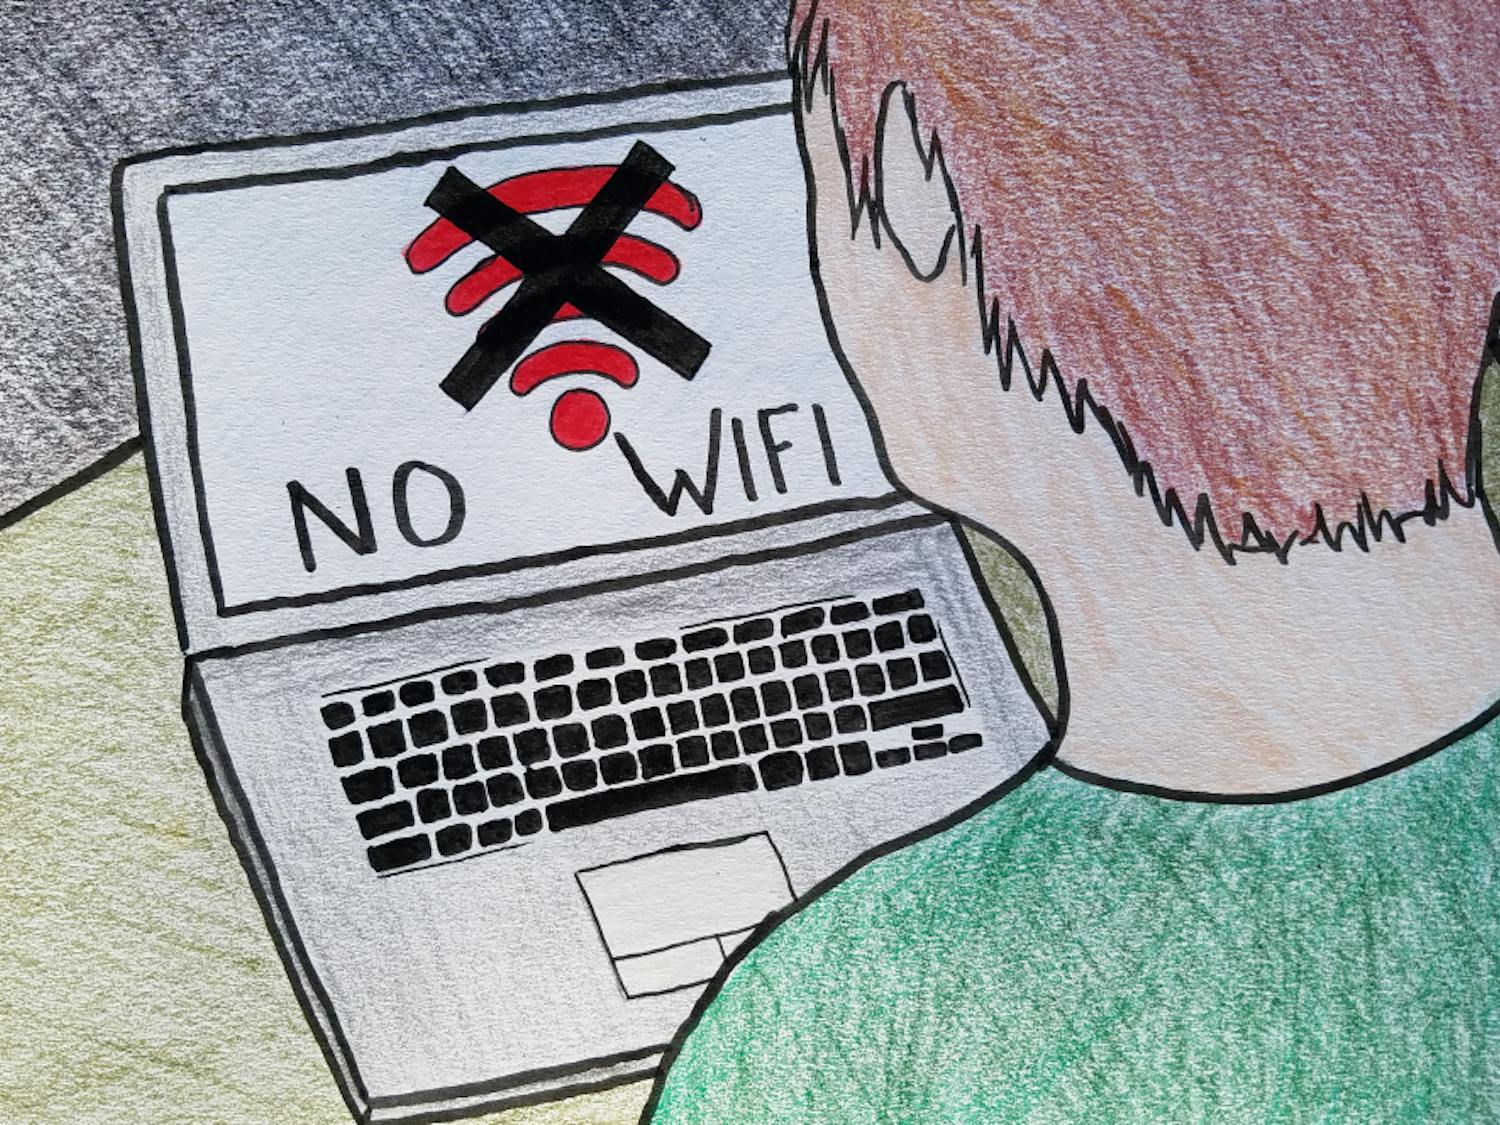 Even though many improvements have been made to campus Wifi, students still find themselves without a consistent and reliable connection to the internet.